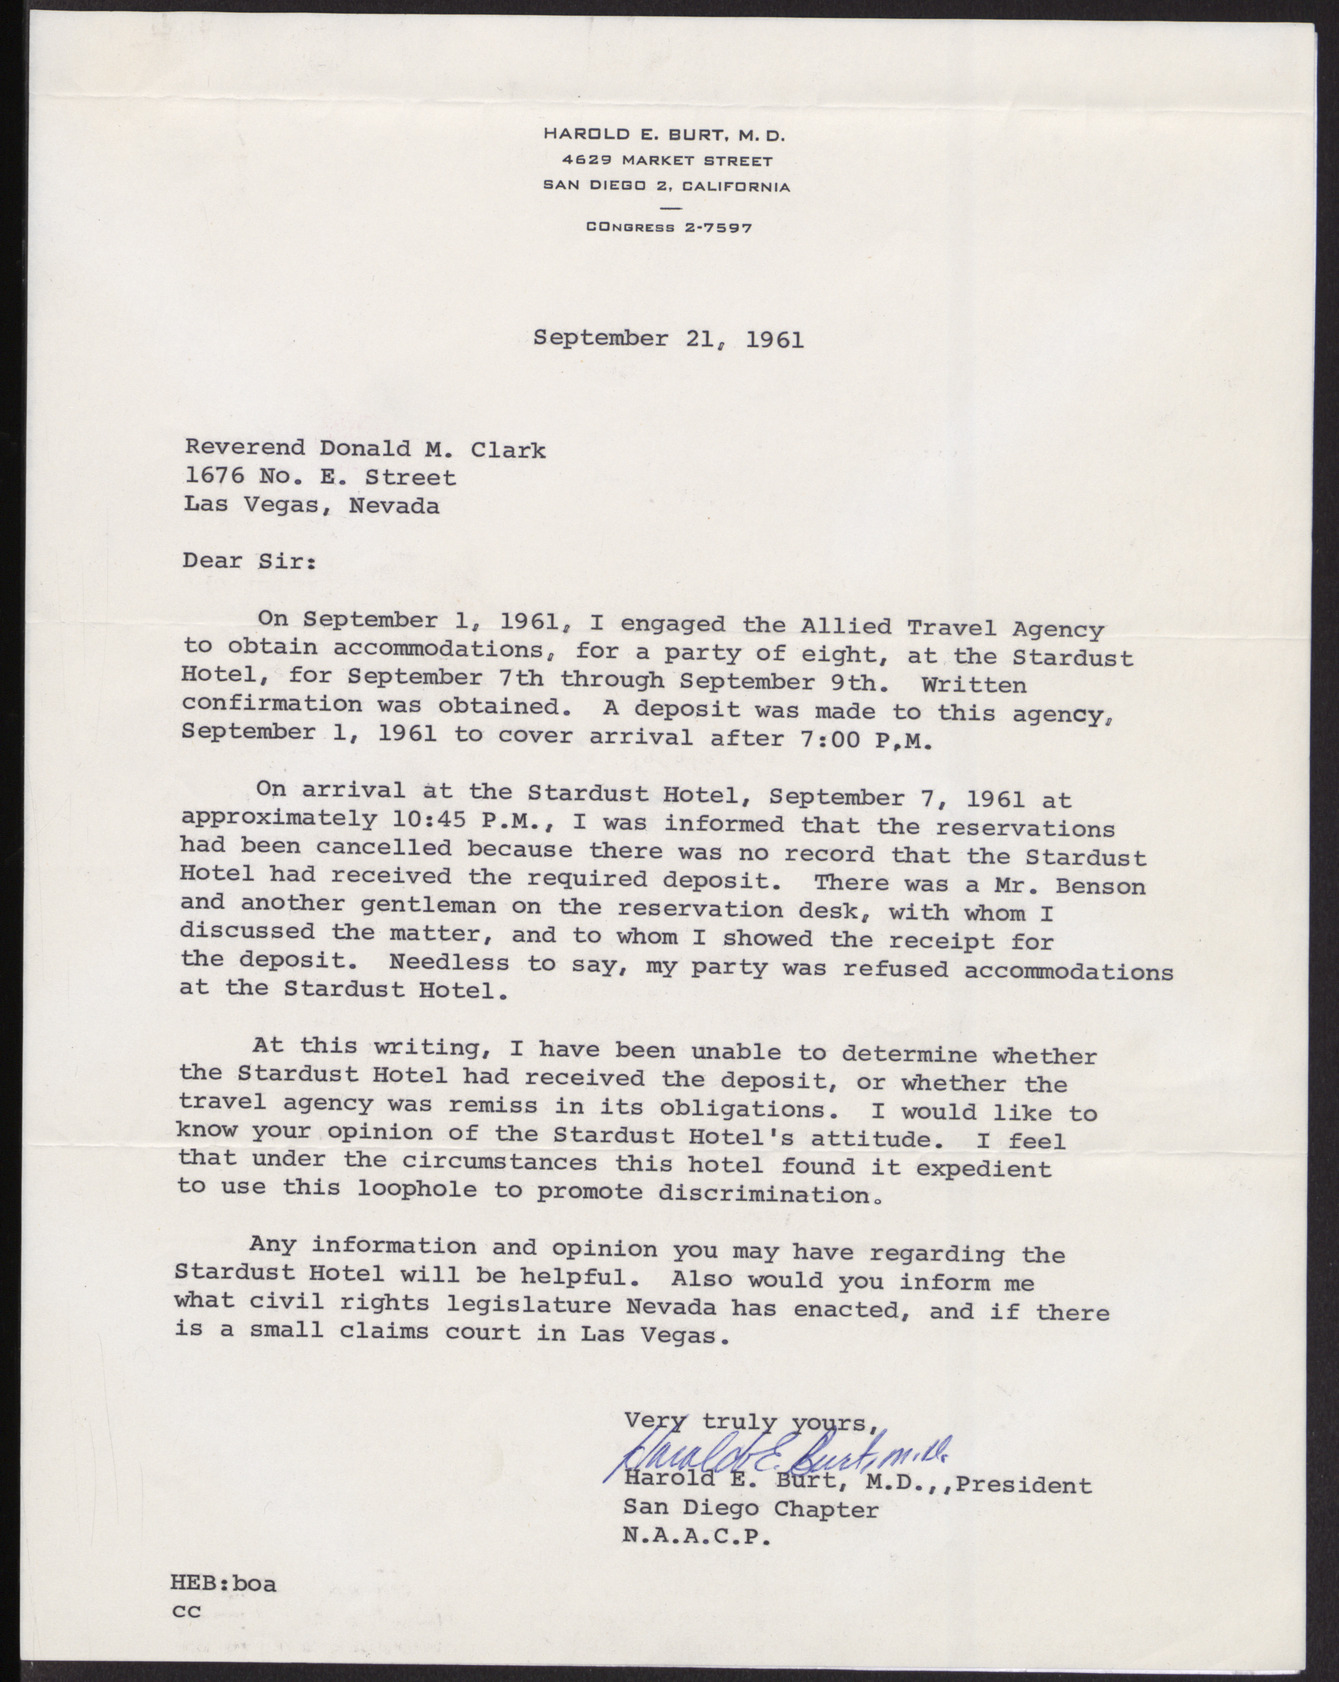 Letter to Reverend Donald M. Clark from NAACP San Diego Chapter President Harold El Burt, M.D, September 21, 1961